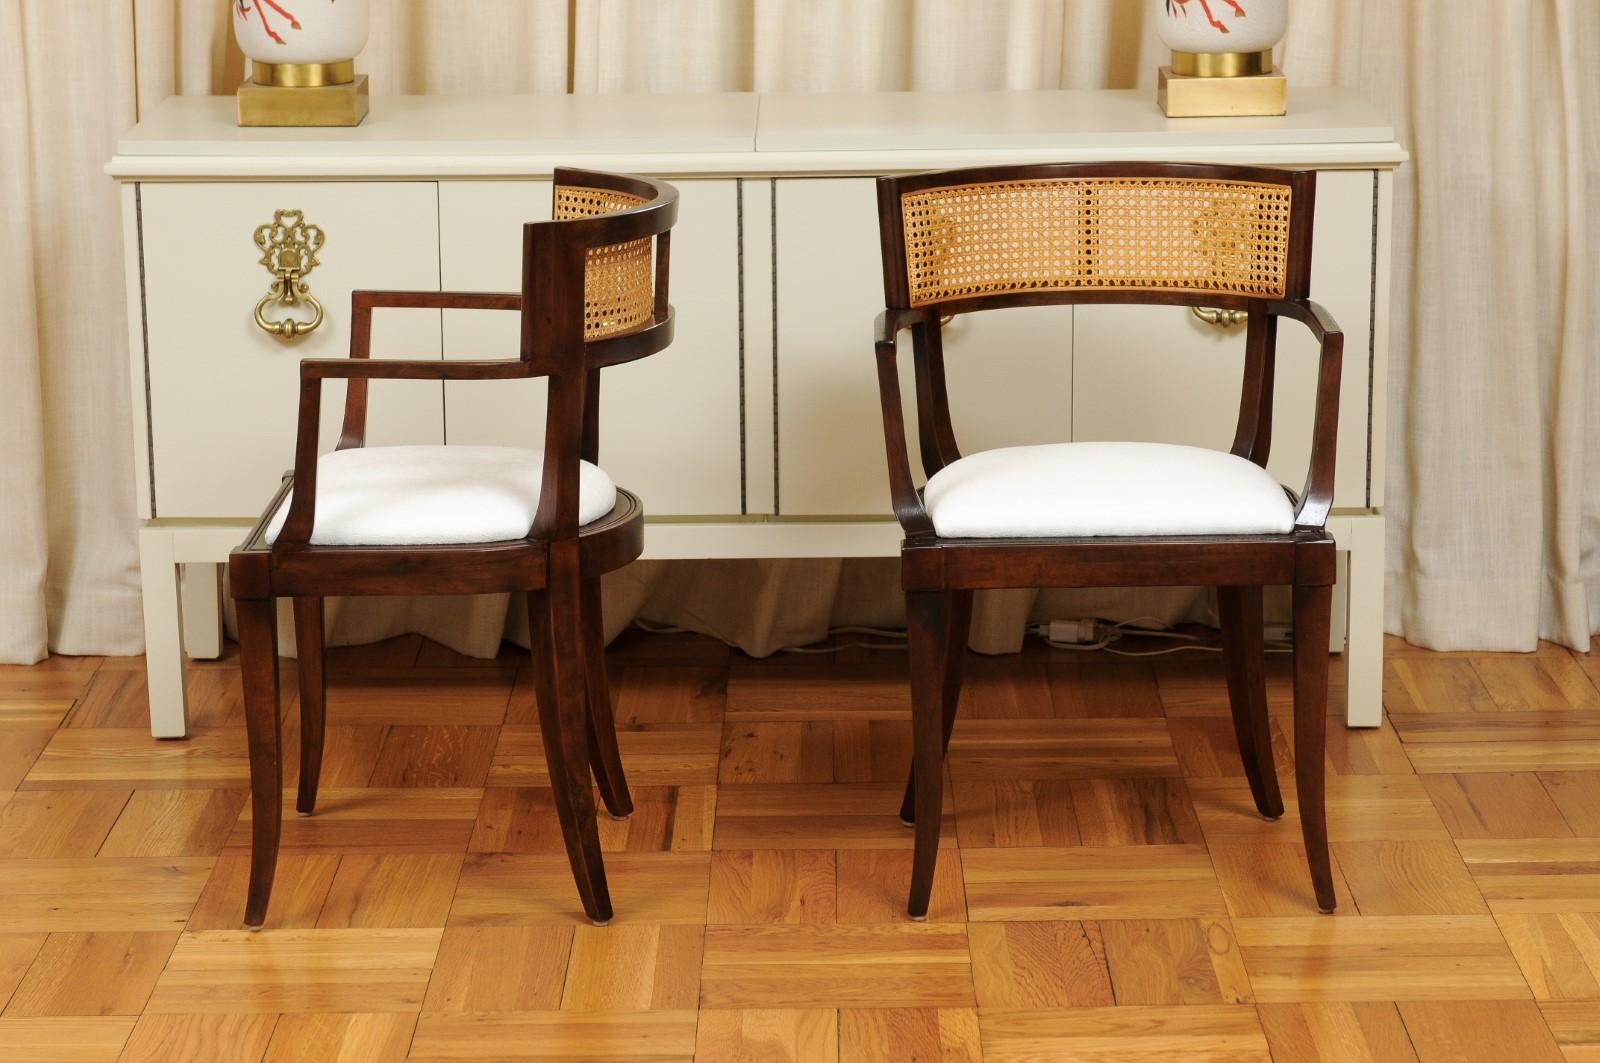 All Arms, Exquisite Set of 14 Klismos Cane Dining Chairs by Baker, circa 1958 For Sale 2